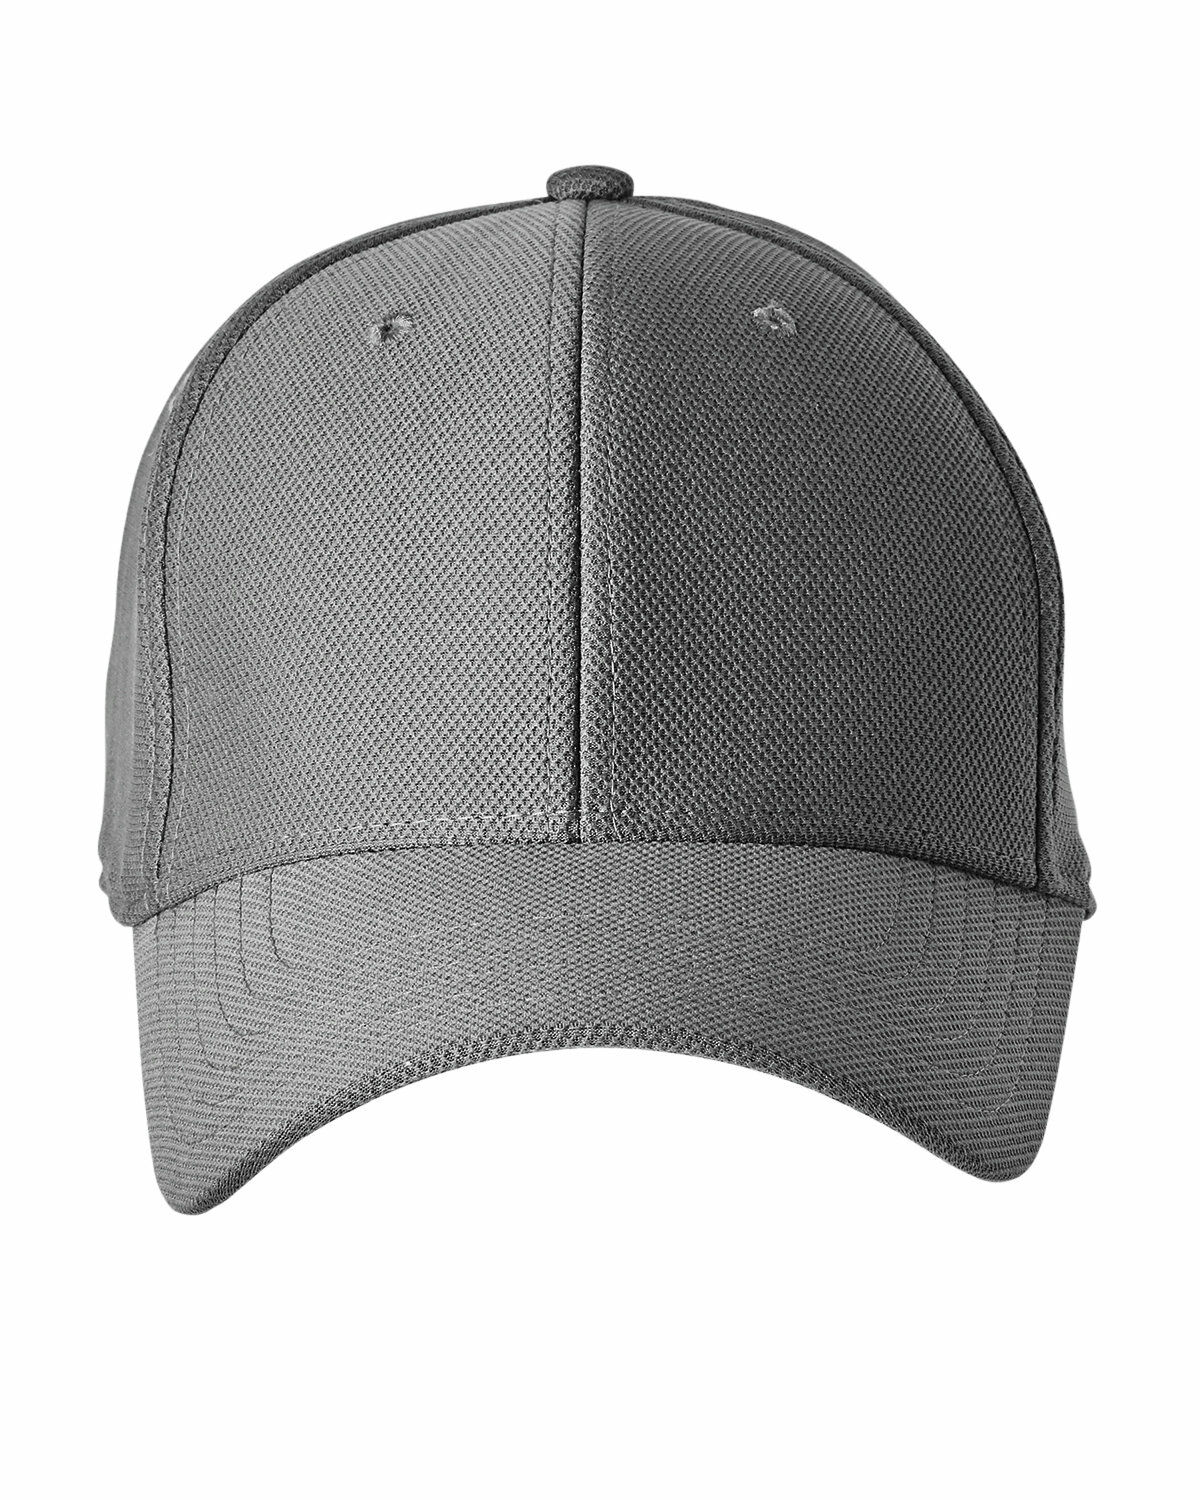 Branded Under Armour Unisex Blitzing Curved Cap Graphite